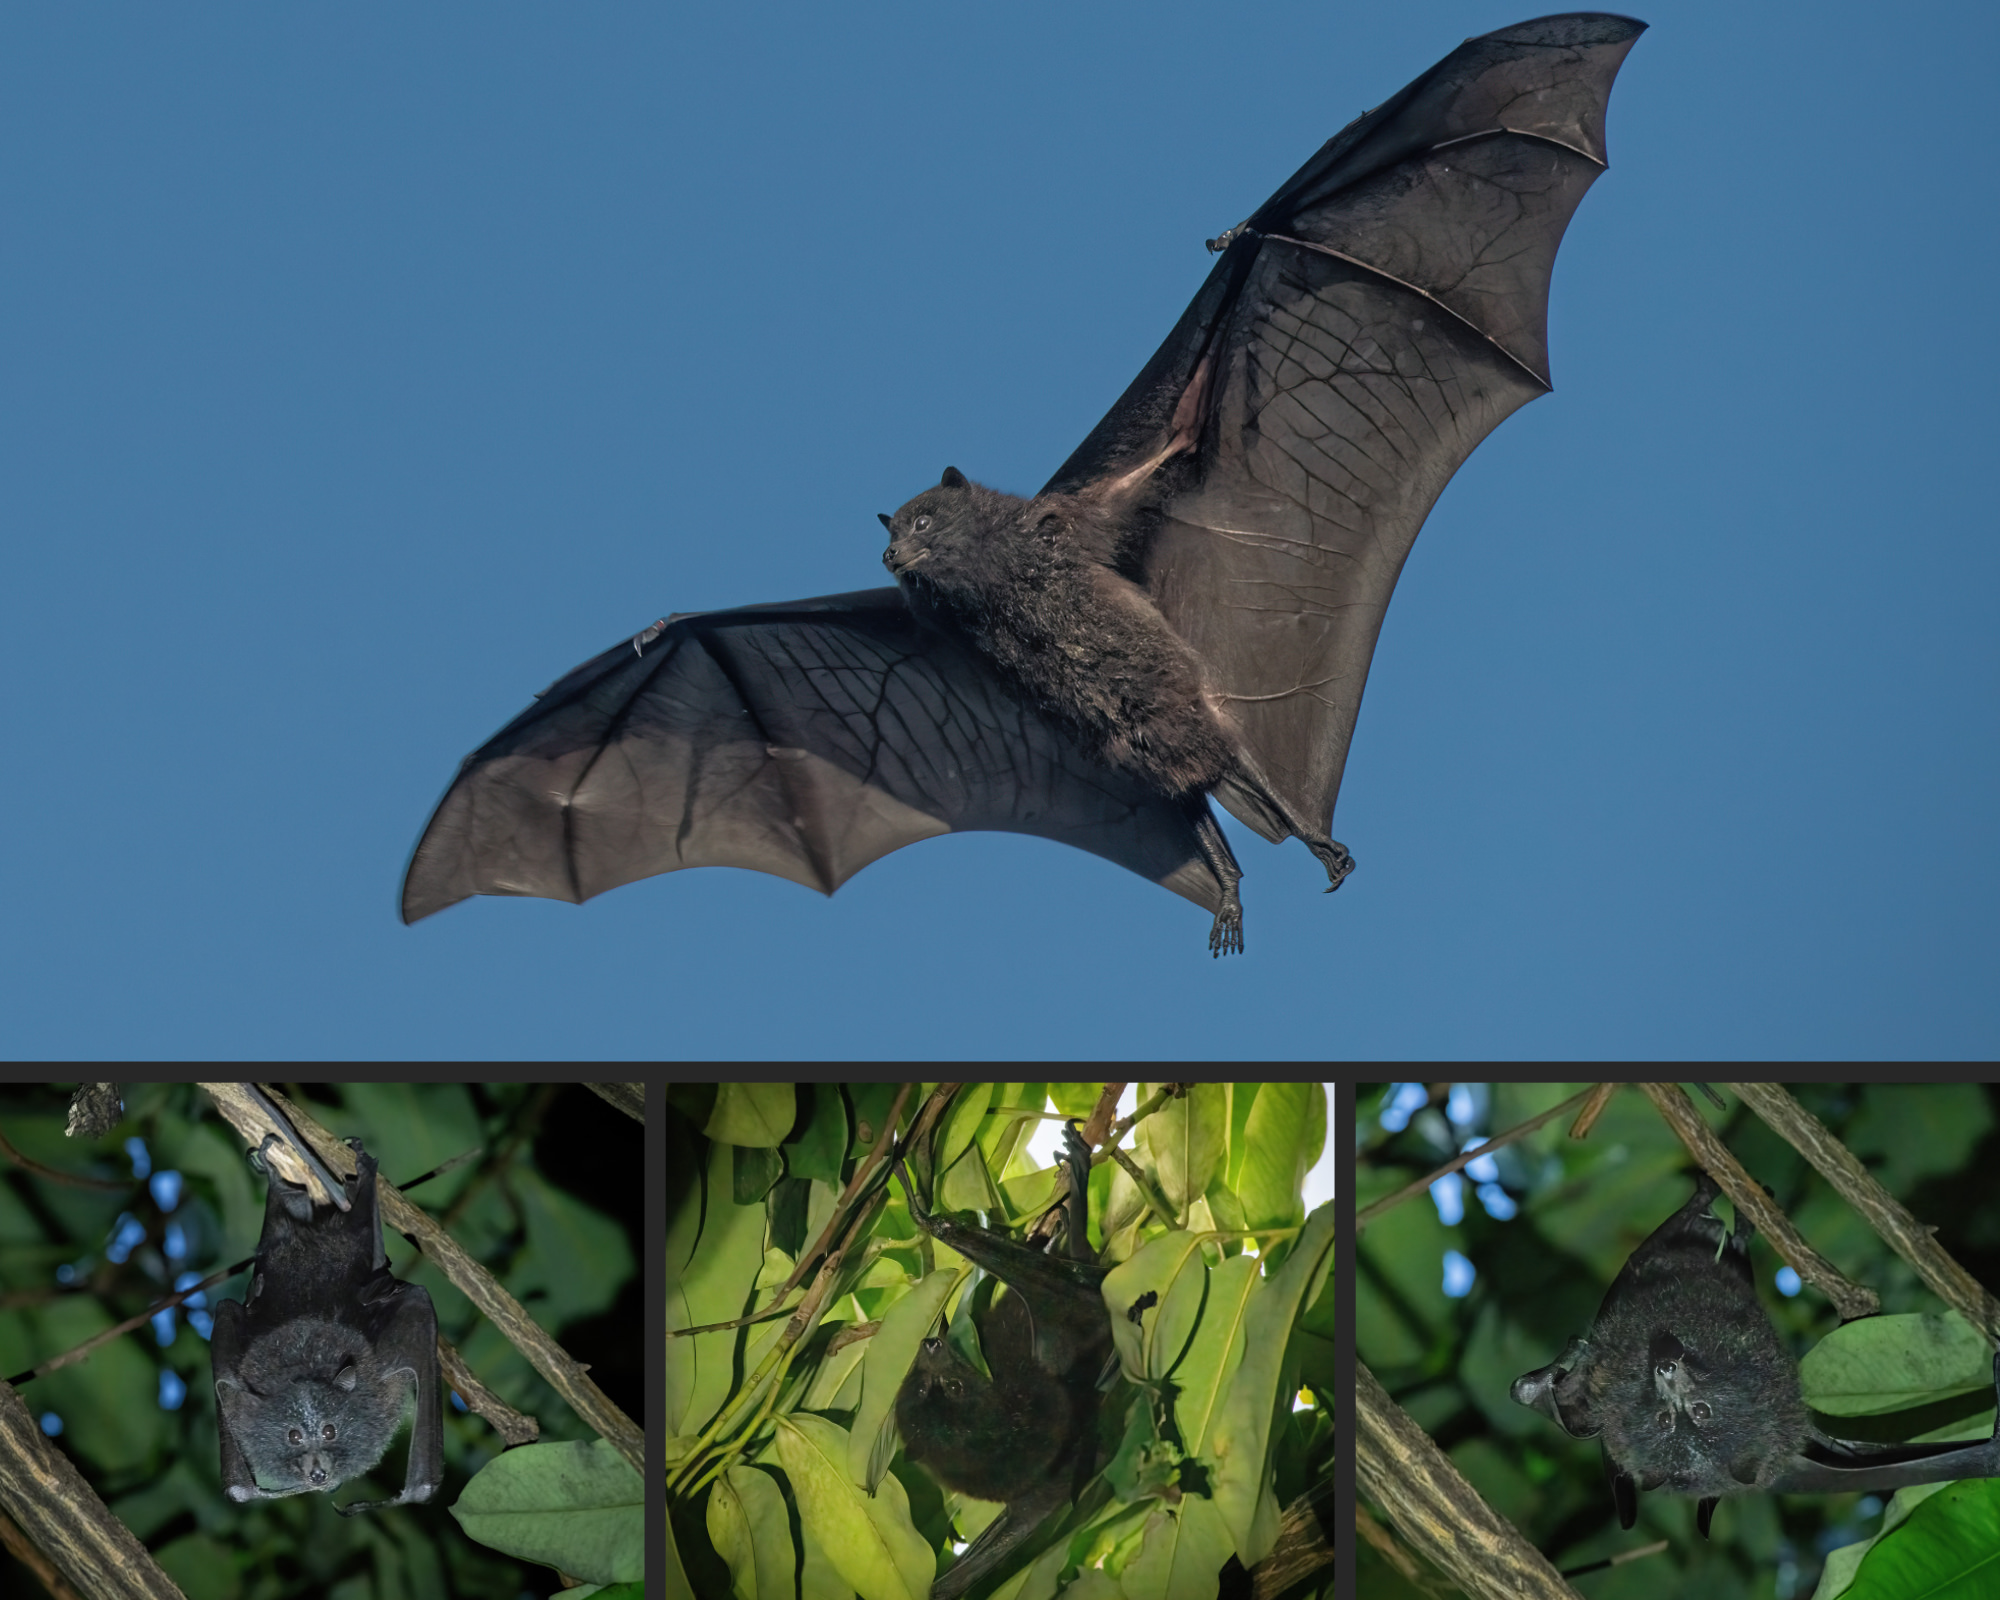 A photocollage of Christmas Island small black flying foxes in a fruit tree and one caught in mid flight